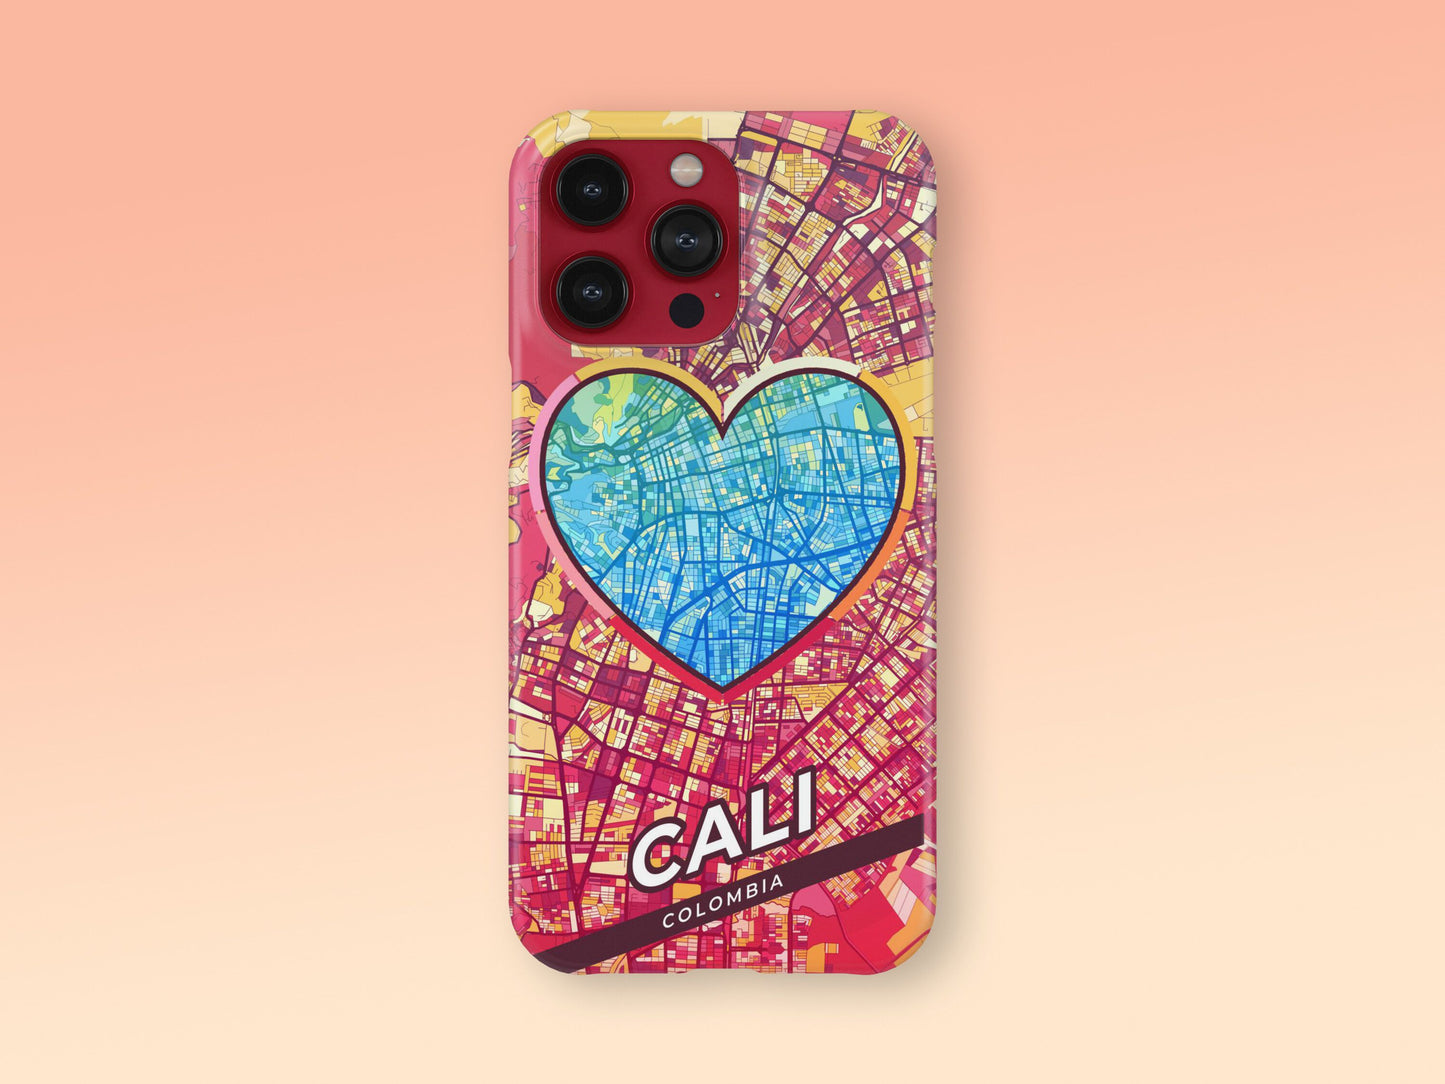 Cali Colombia slim phone case with colorful icon. Birthday, wedding or housewarming gift. Couple match cases. 2